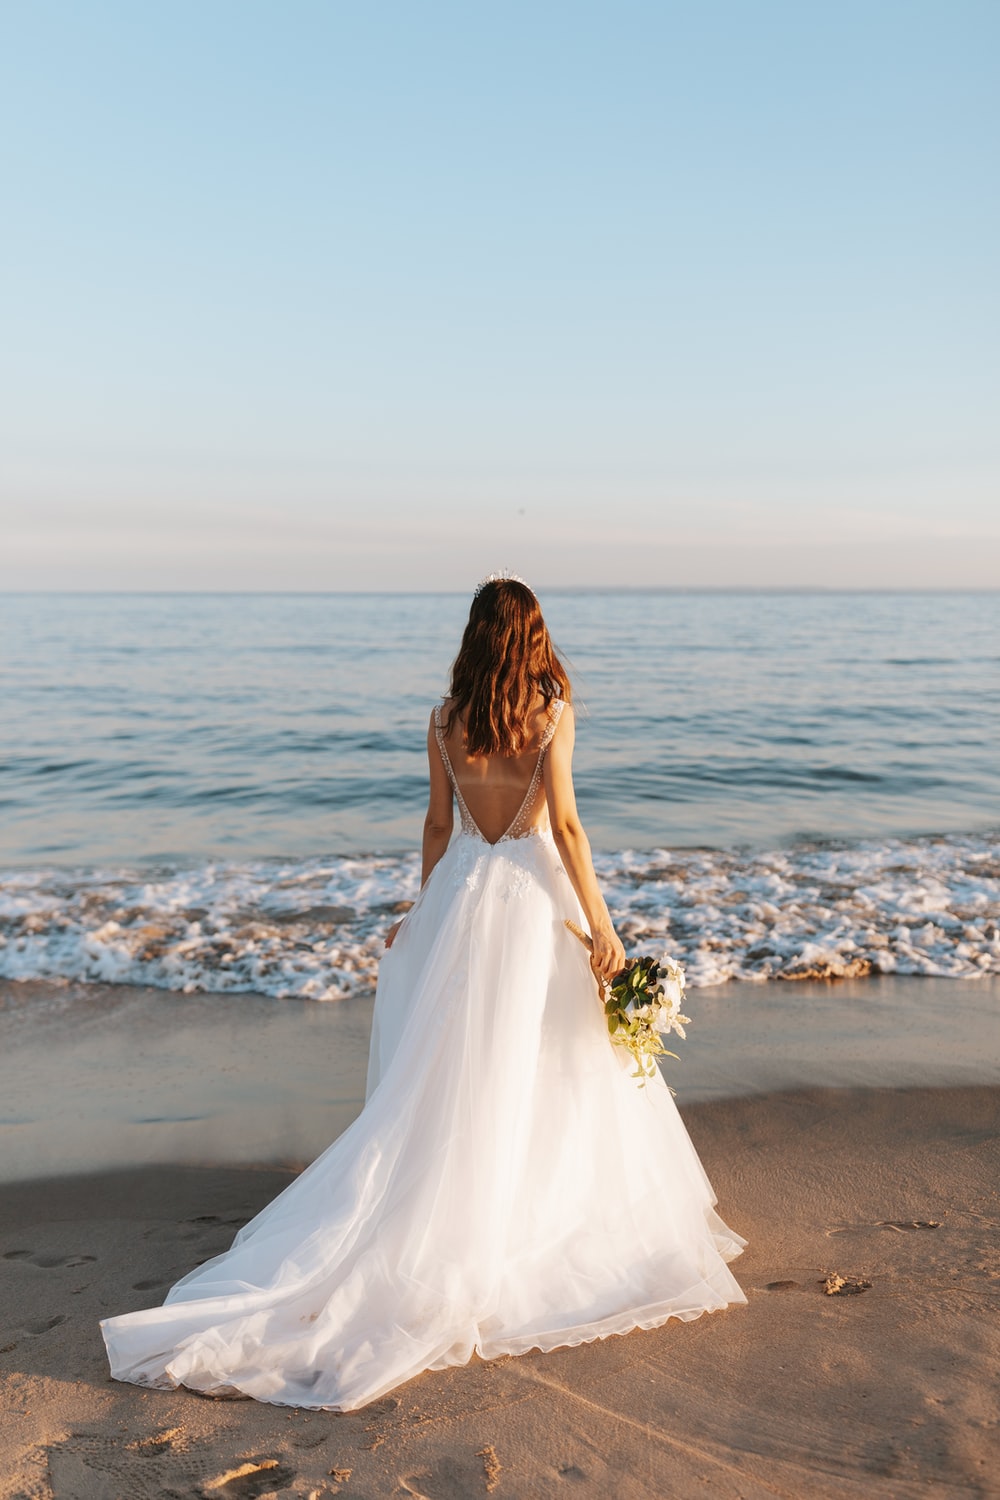 woman in white wedding dress standing on beach during daytime photo